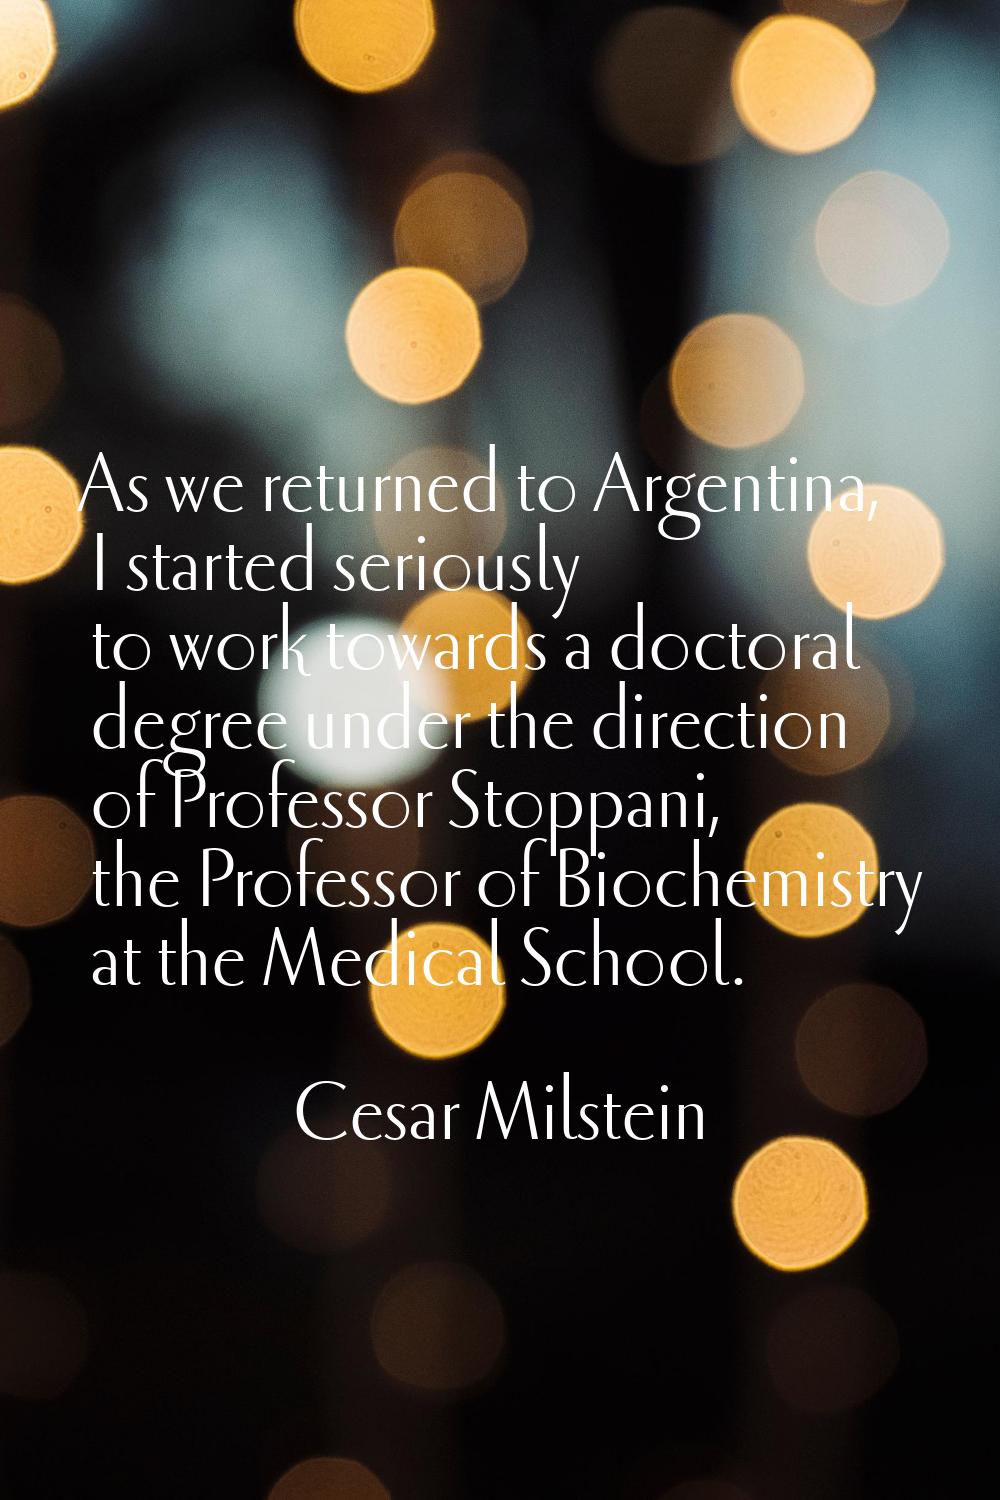 As we returned to Argentina, I started seriously to work towards a doctoral degree under the direct